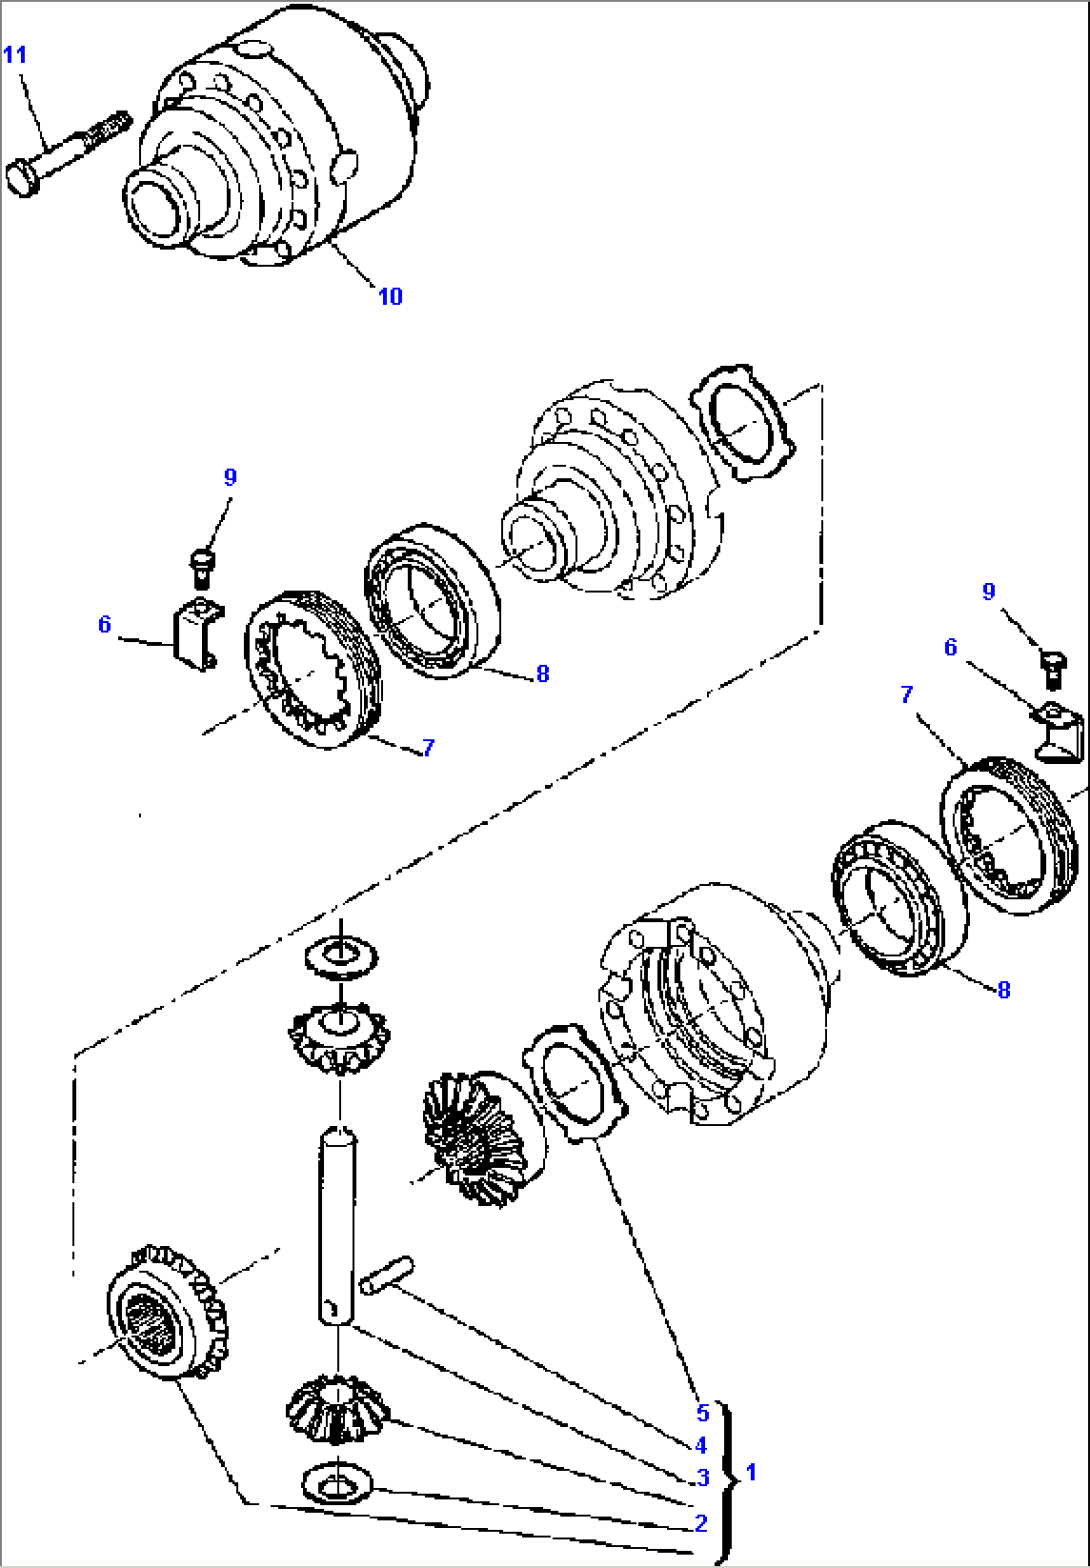 FIG. F3415-01A0 FRONT AXLE (4WD) - DIFFERENTIAL